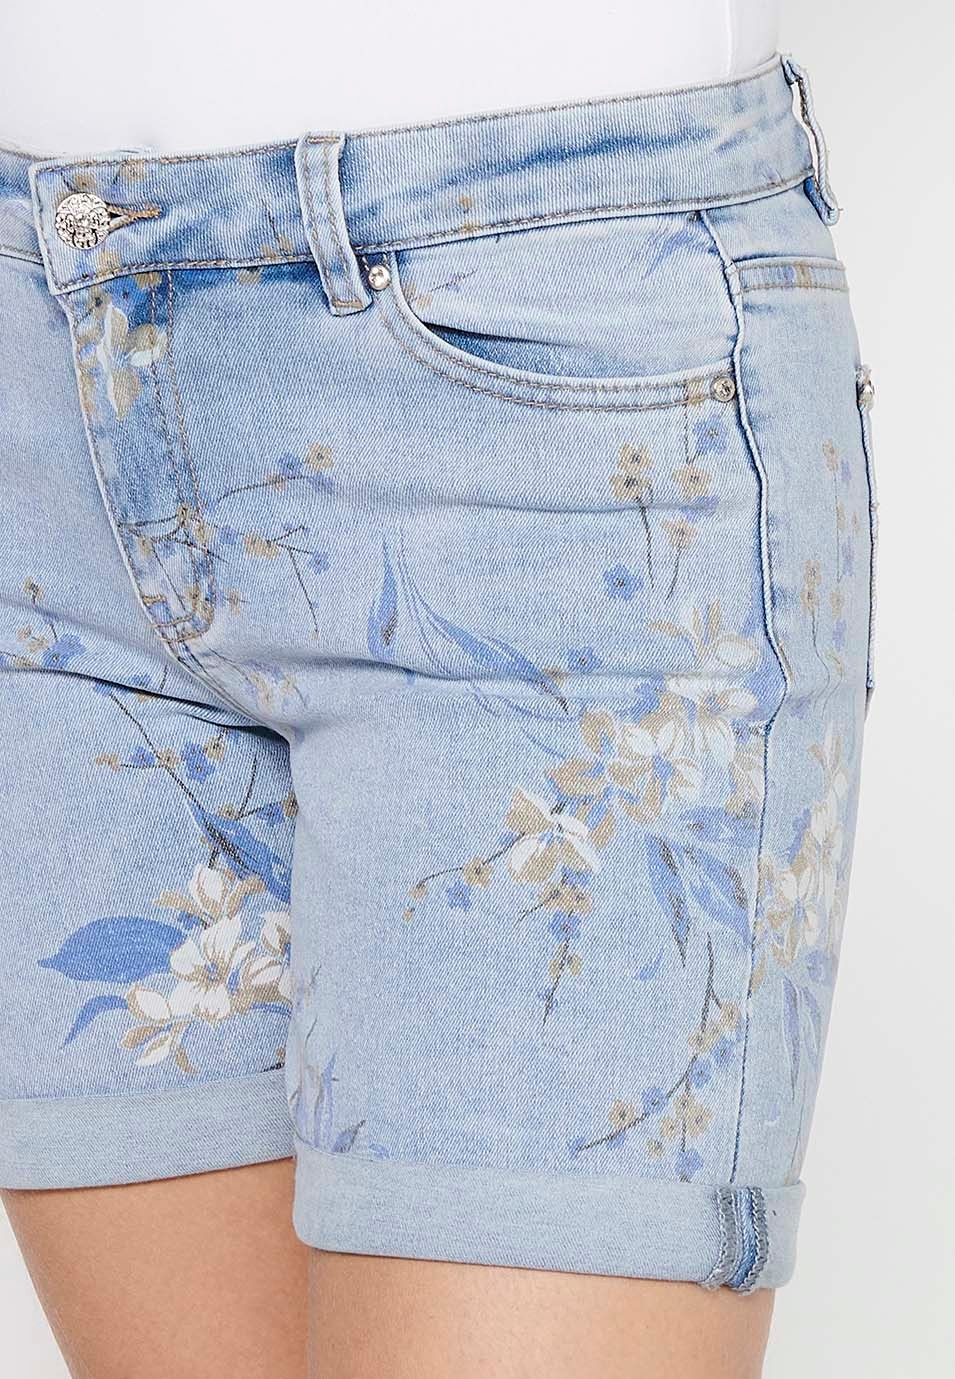 Shorts with a turn-up finish with zipper and button closure with a Blue floral print for Women 7